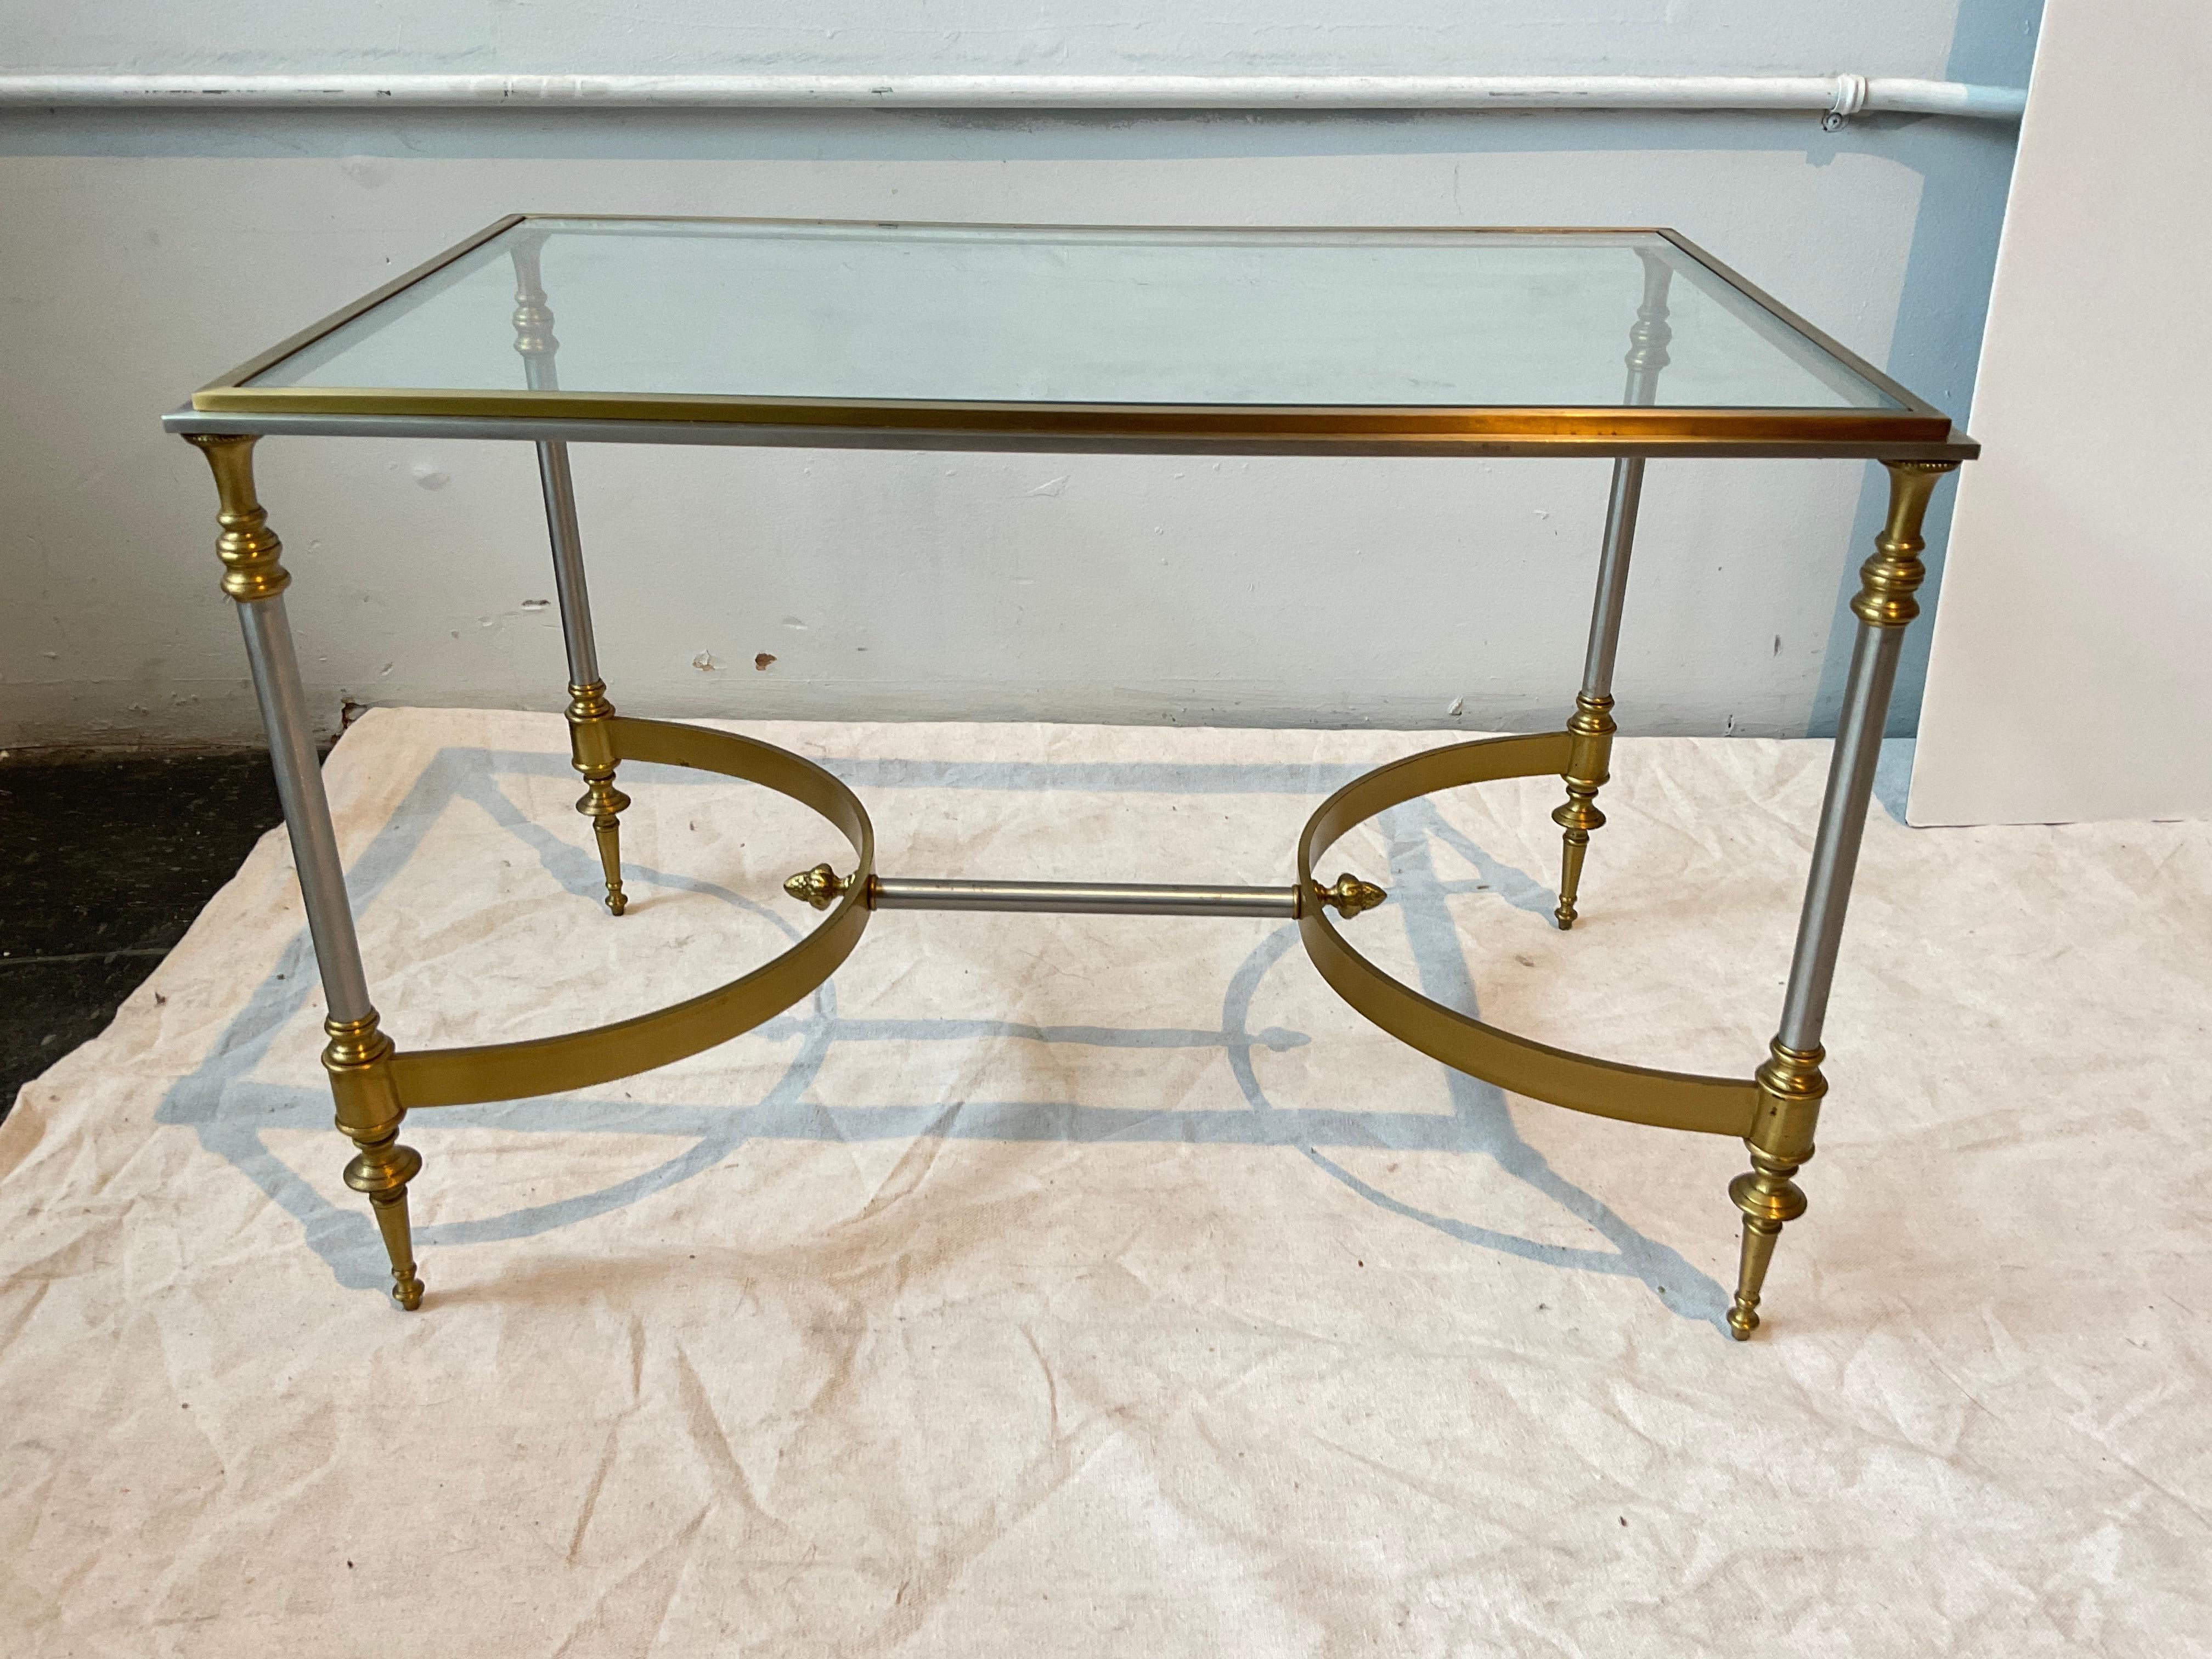 1980s Maison Jansen style Italian steel and brass side table / small coffee table.